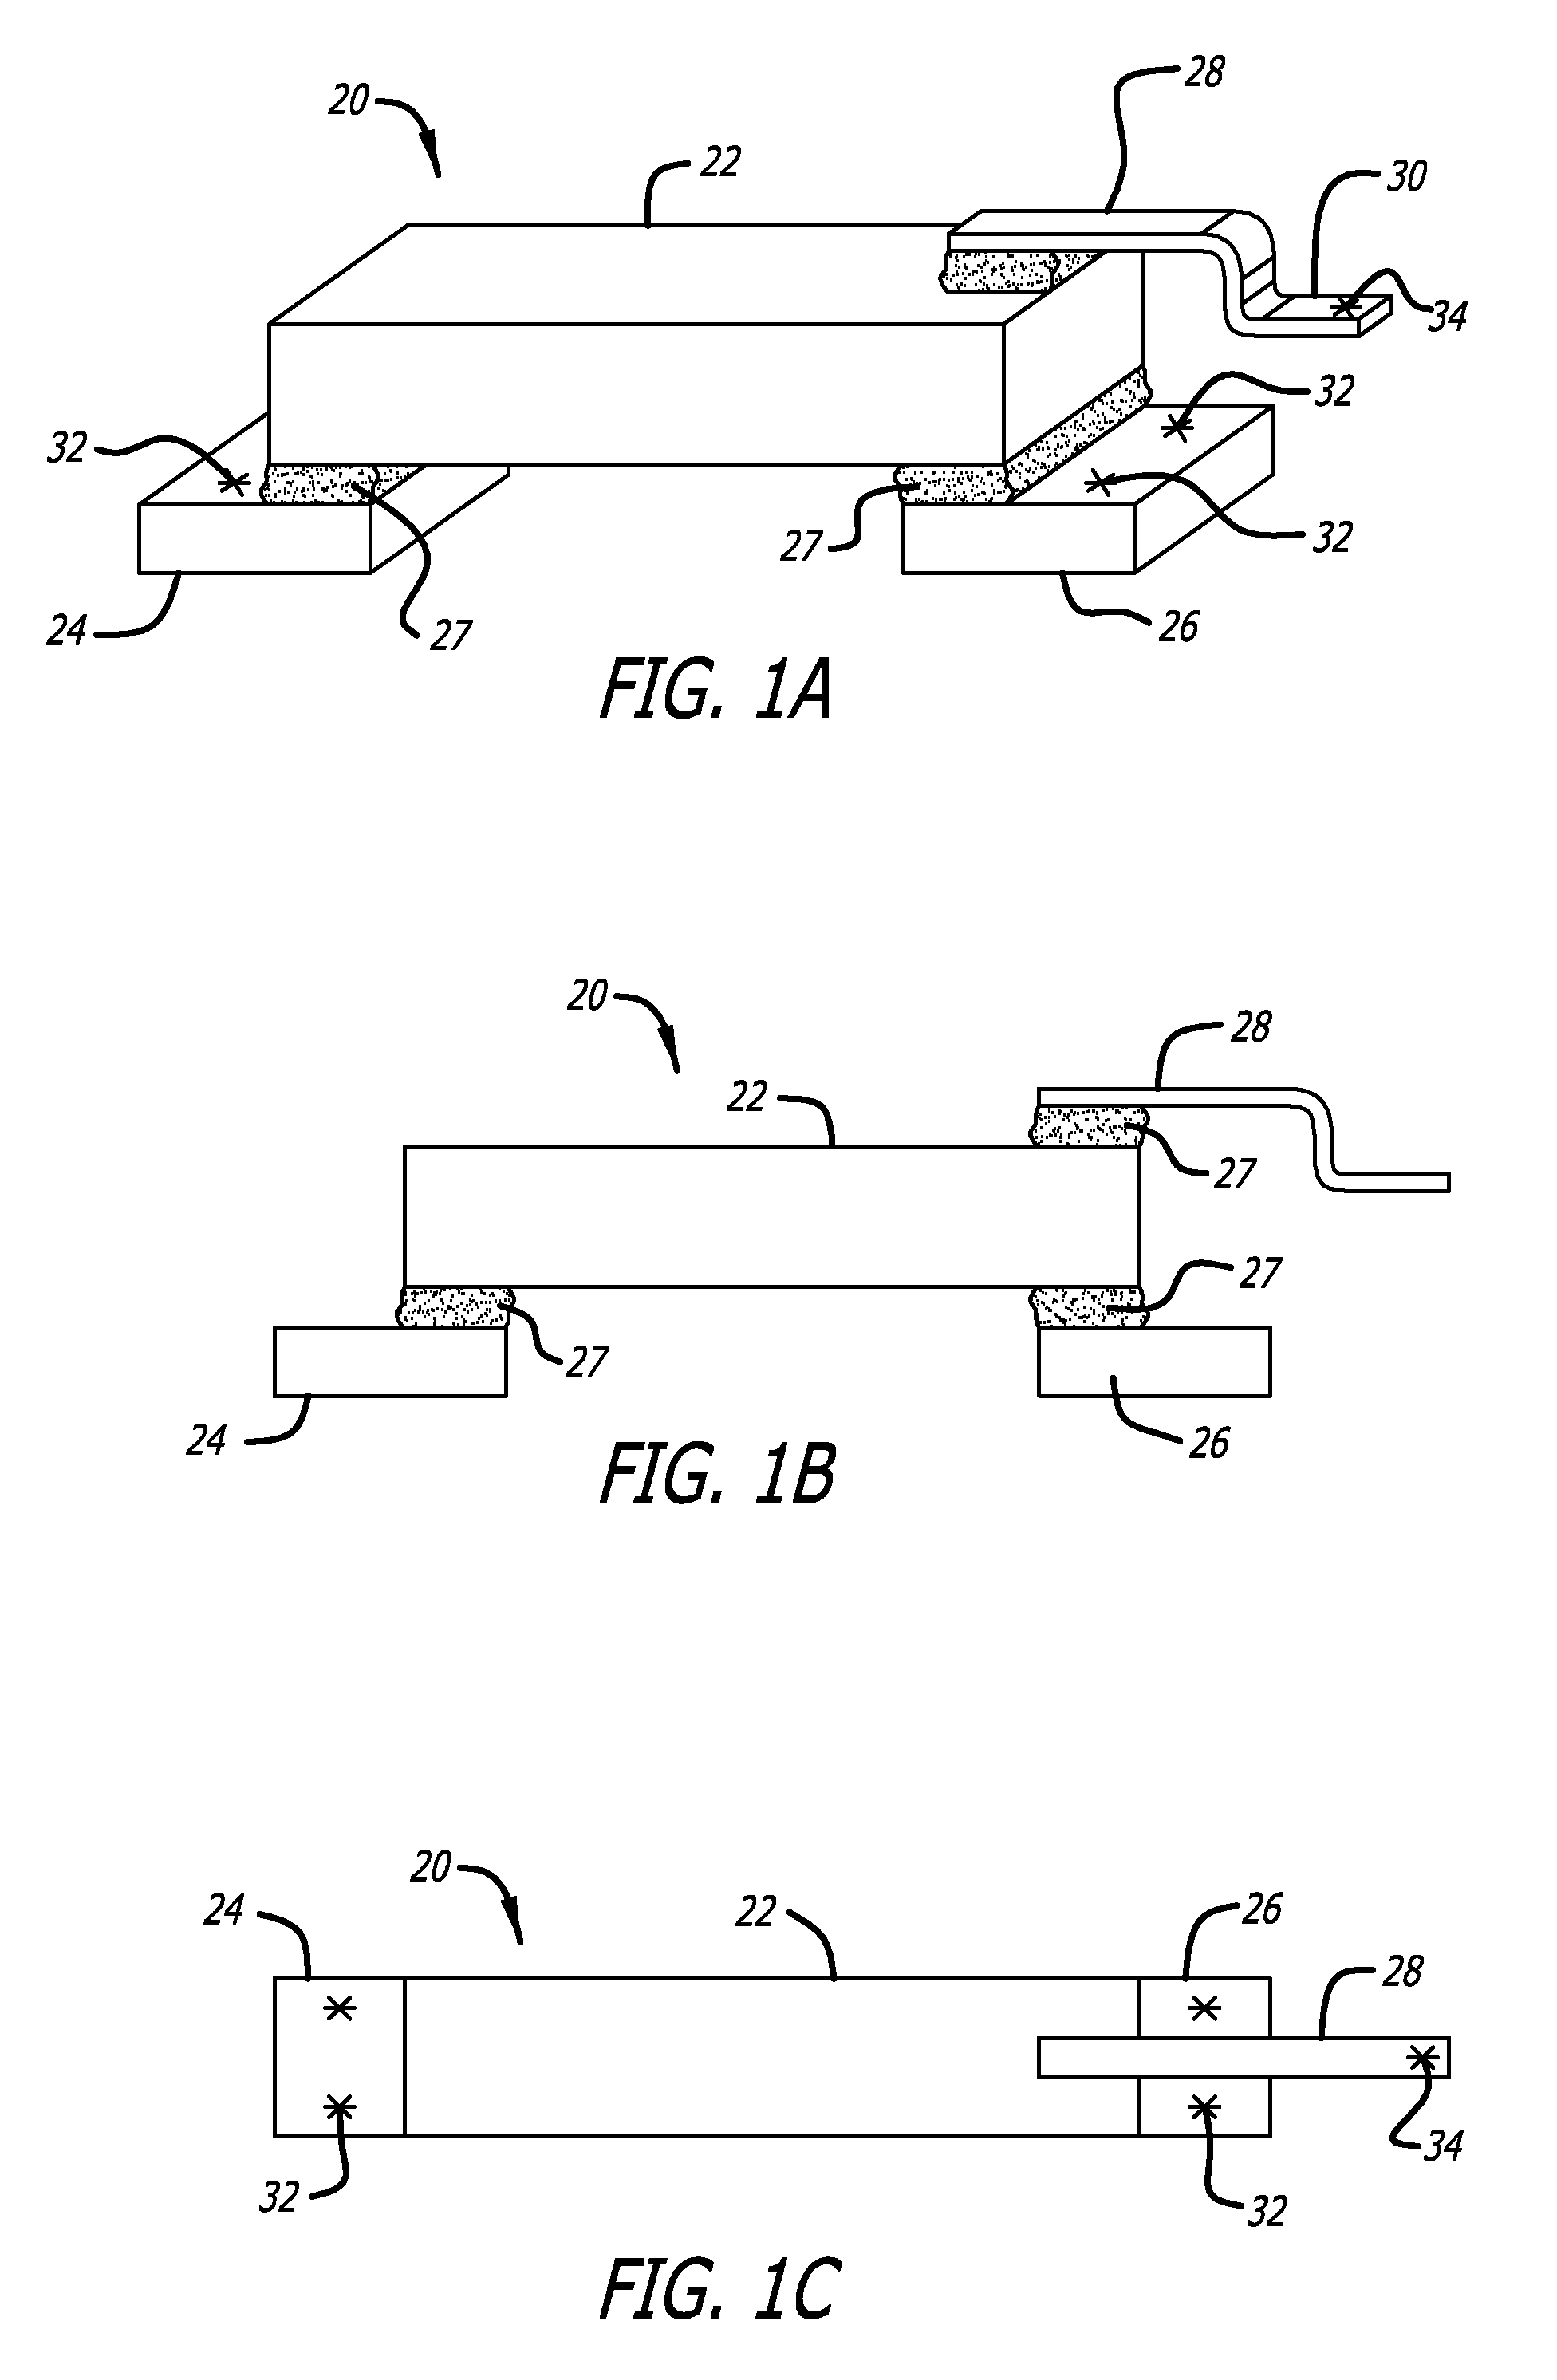 Wireless microactuator motor assembly for use in a hard disk drive suspension, and mechanical and electrical connections thereto